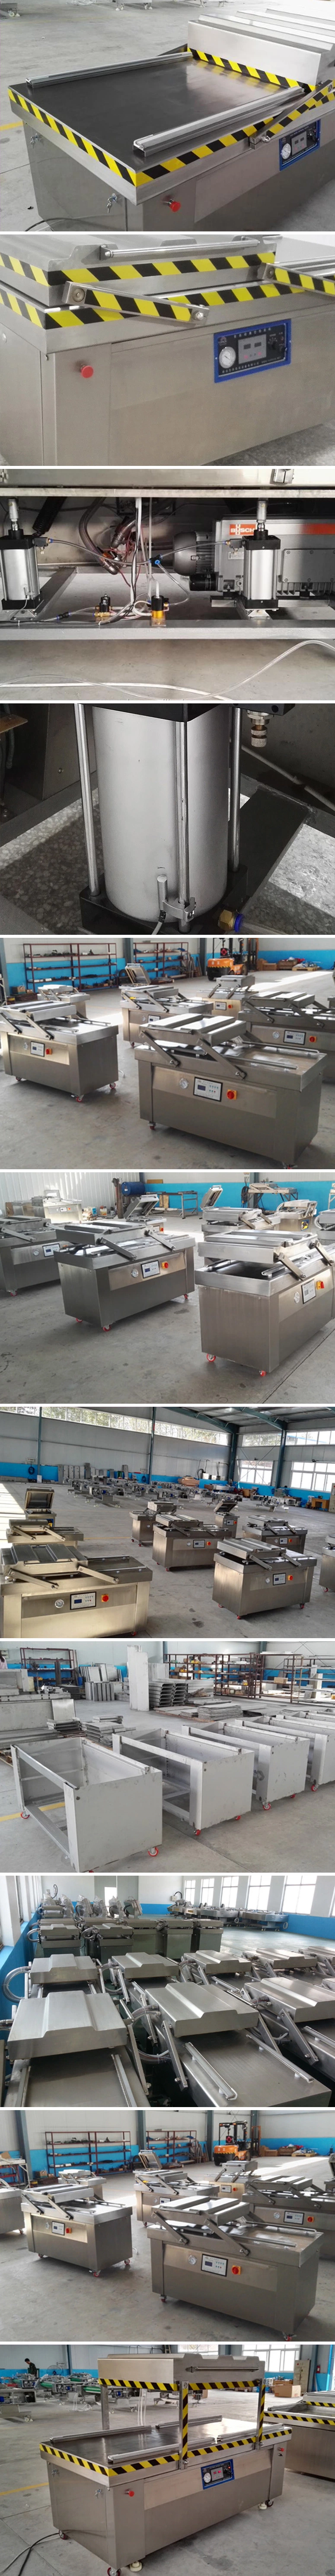 Dz800/2s Double Chamber Food Packer Packaging/Pack/Vacuum Packing Machine for Meat Chicken Fish